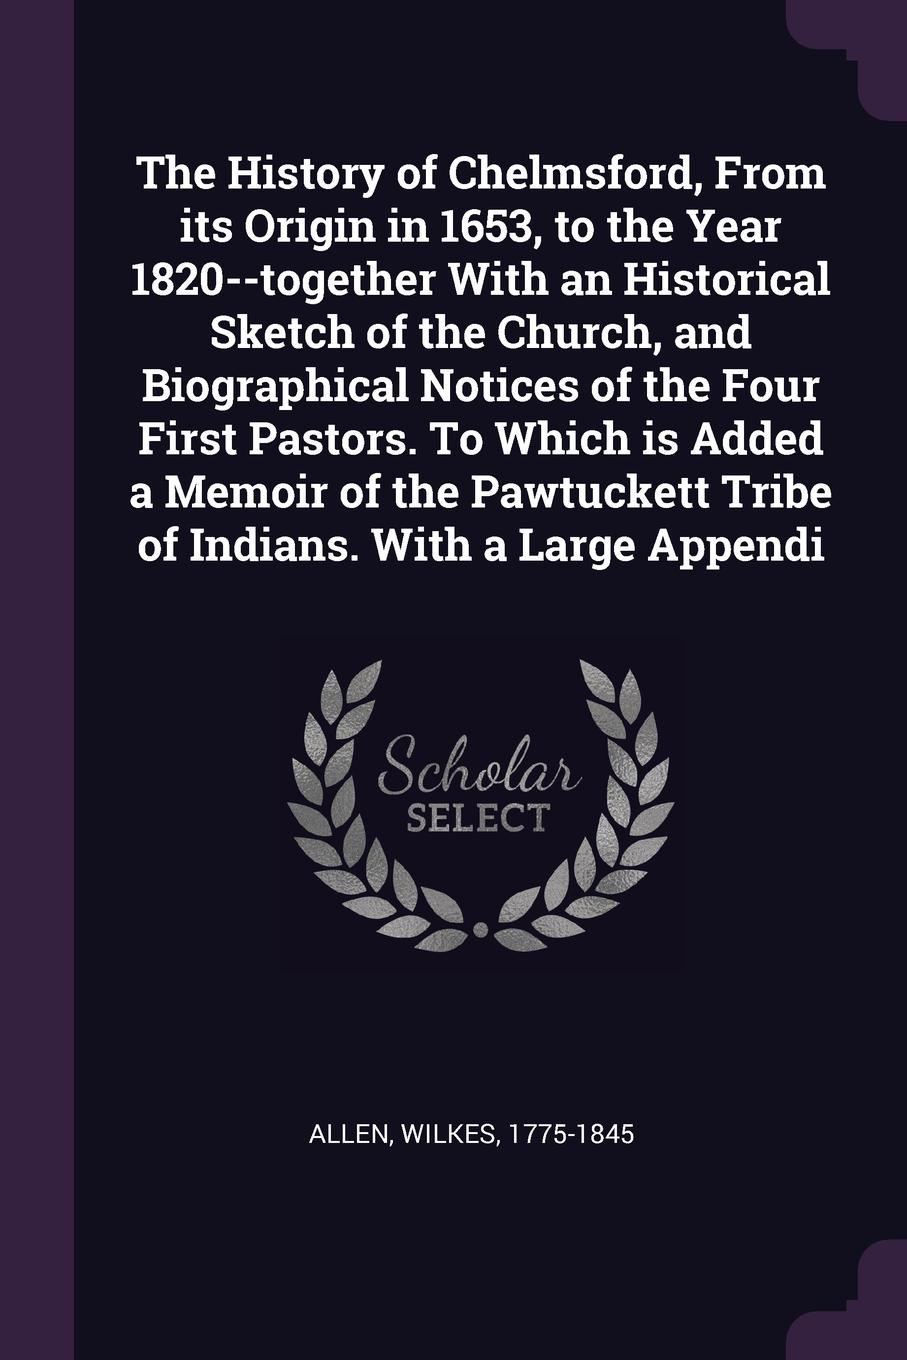 The History of Chelmsford, From its Origin in 1653, to the Year 1820--together With an Historical Sketch of the Church, and Biographical Notices of the Four First Pastors. To Which is Added a Memoir of the Pawtuckett Tribe of Indians. With a Large...